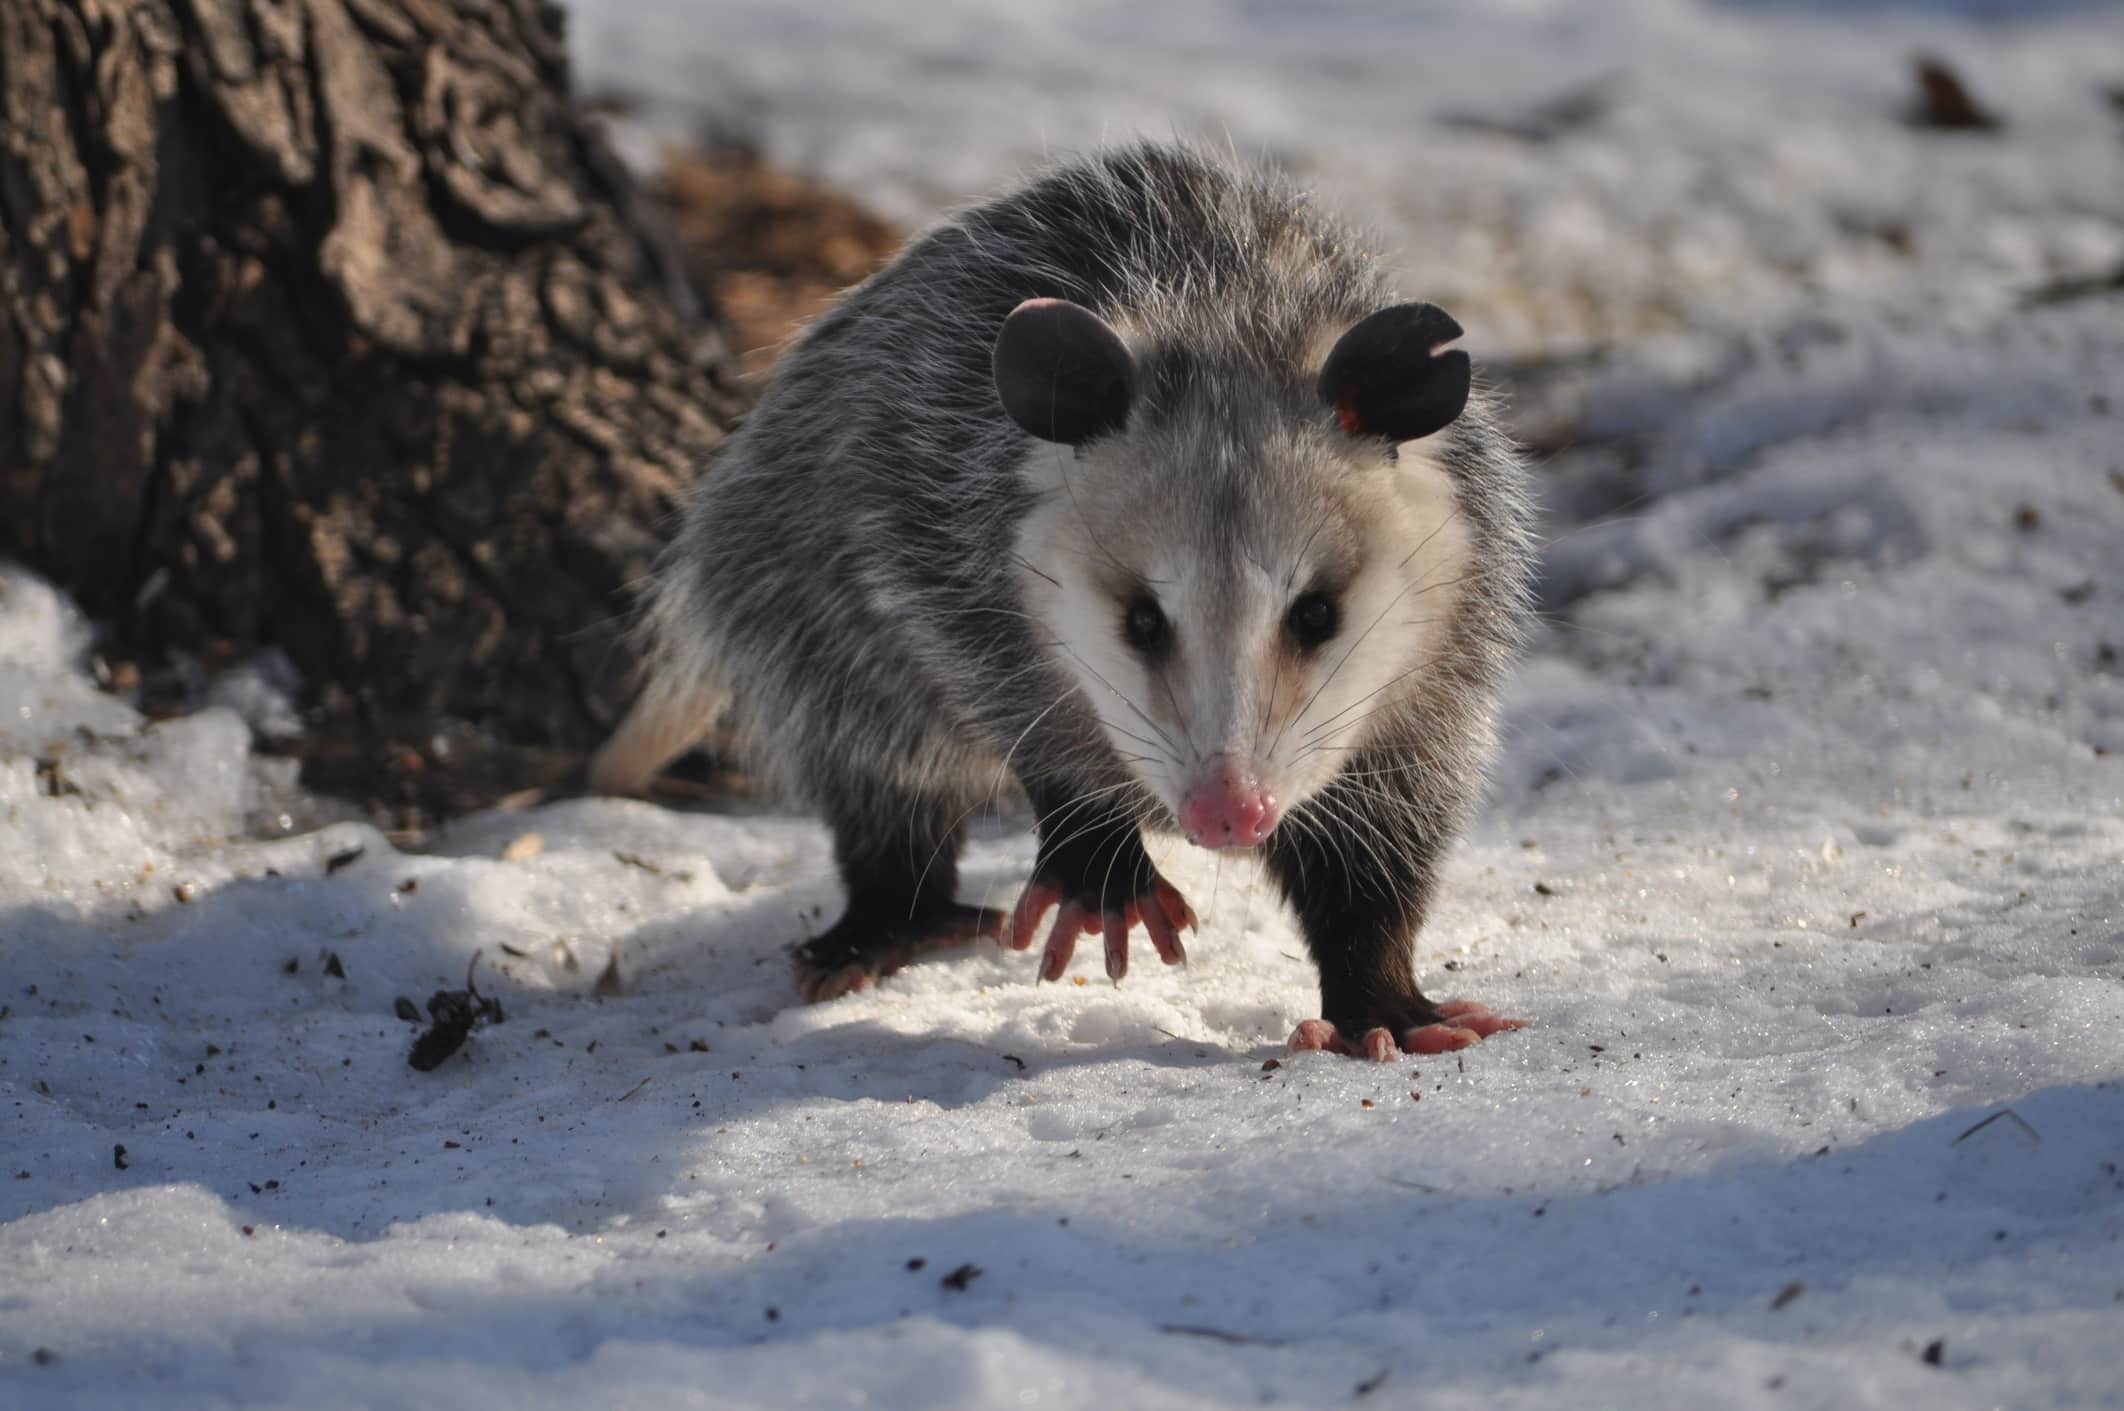 A possum in the snow looks for a new place to live.